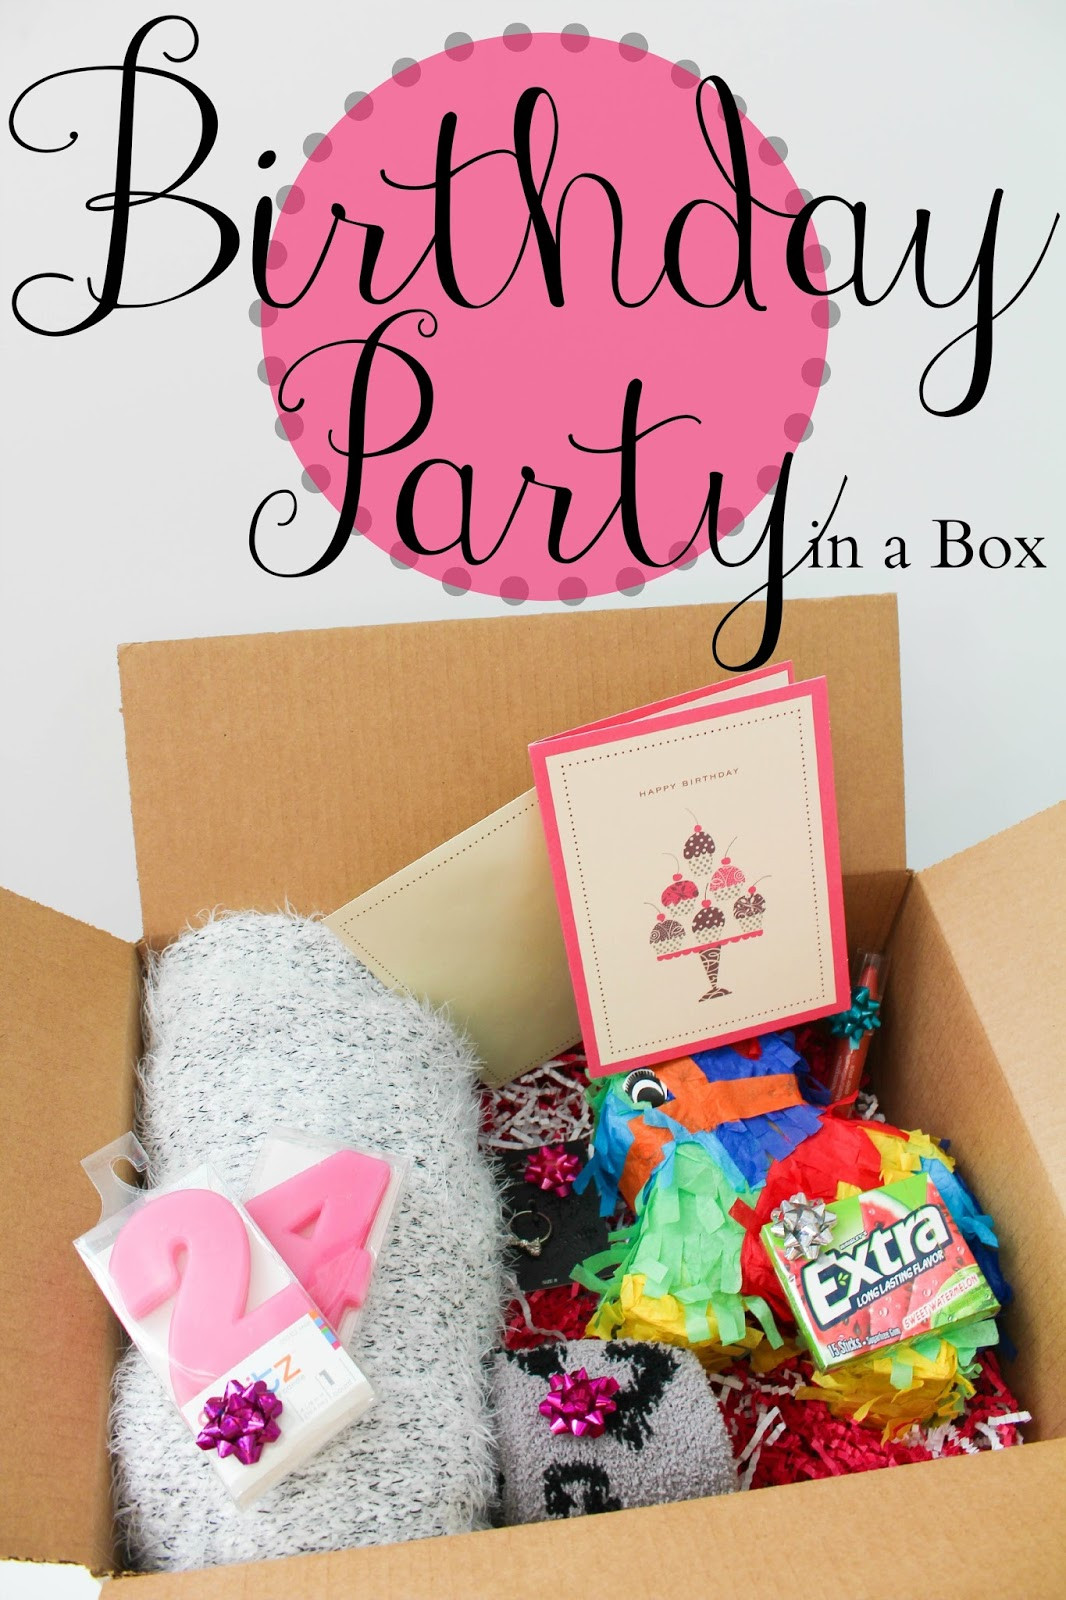 Birthday Party In A Box
 Breezy Days Give Extra With a Birthday Party in a Box